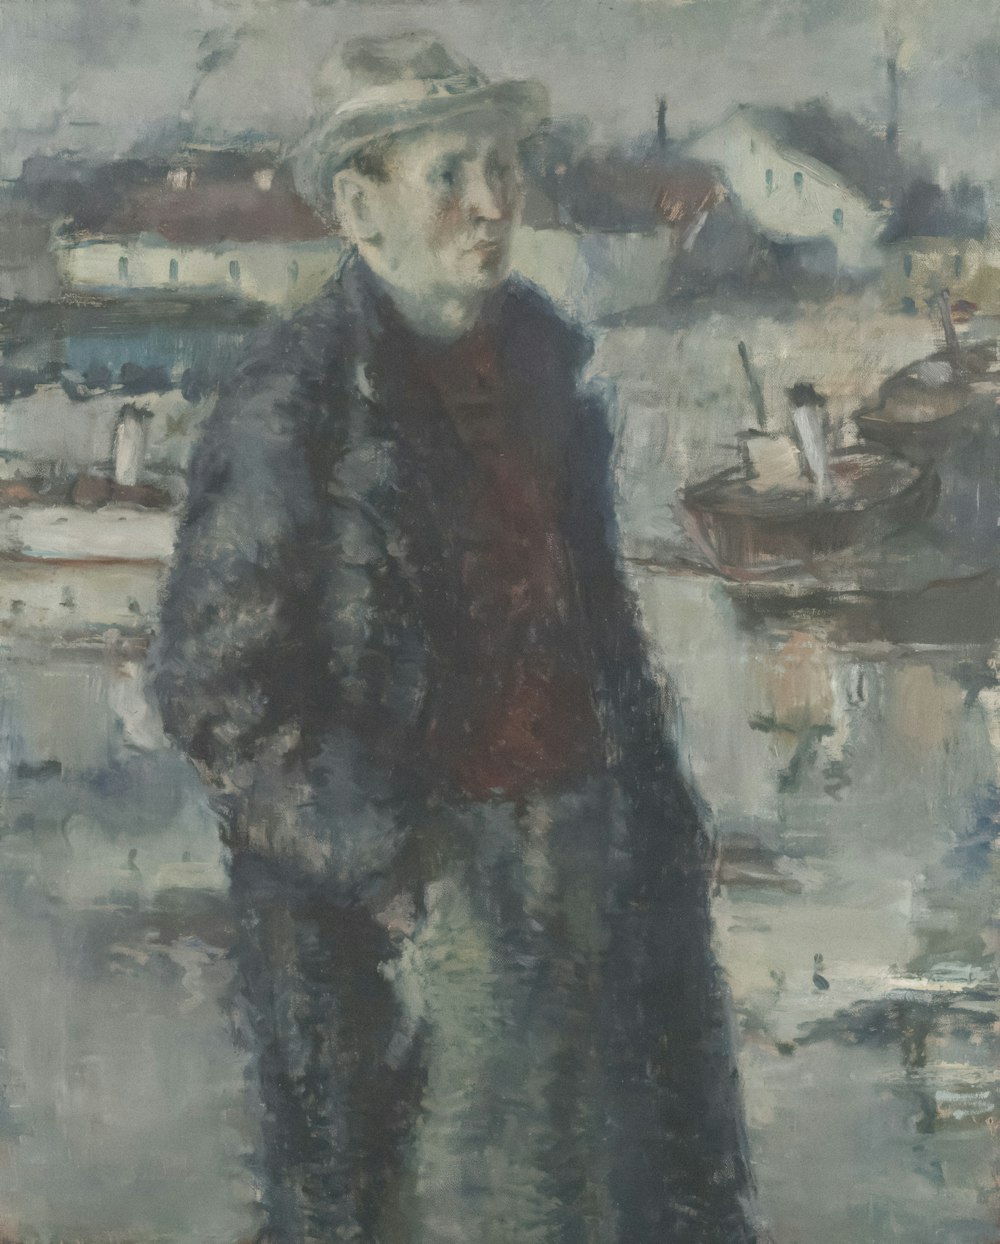 a painting of a man standing in front of a body of water